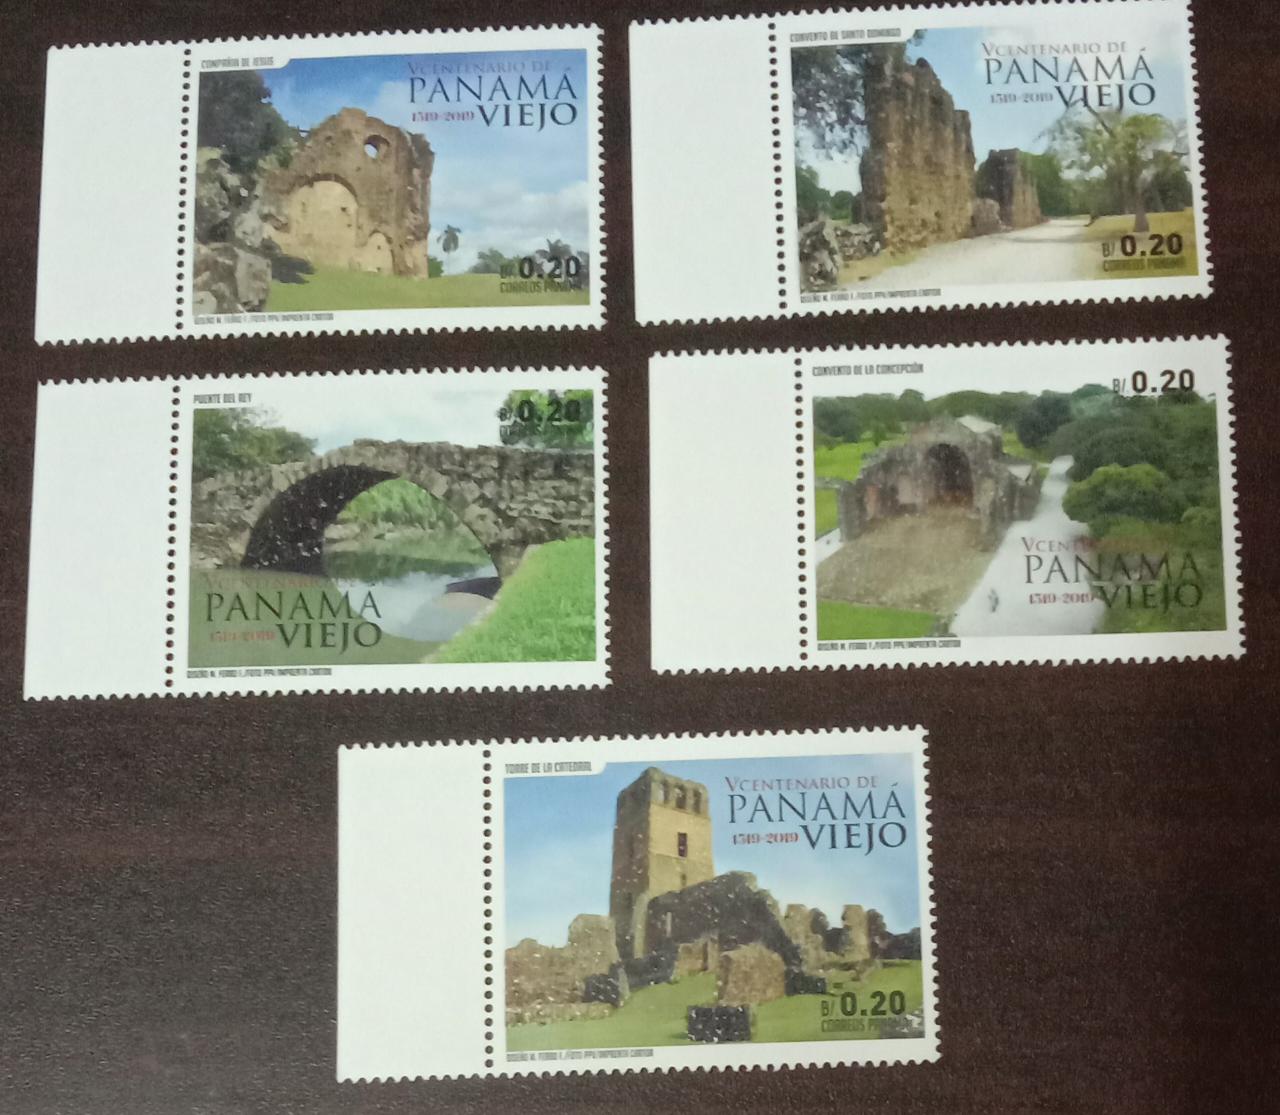 Set of 5 stamps from Panama with real stone dust affixed on all stamps.